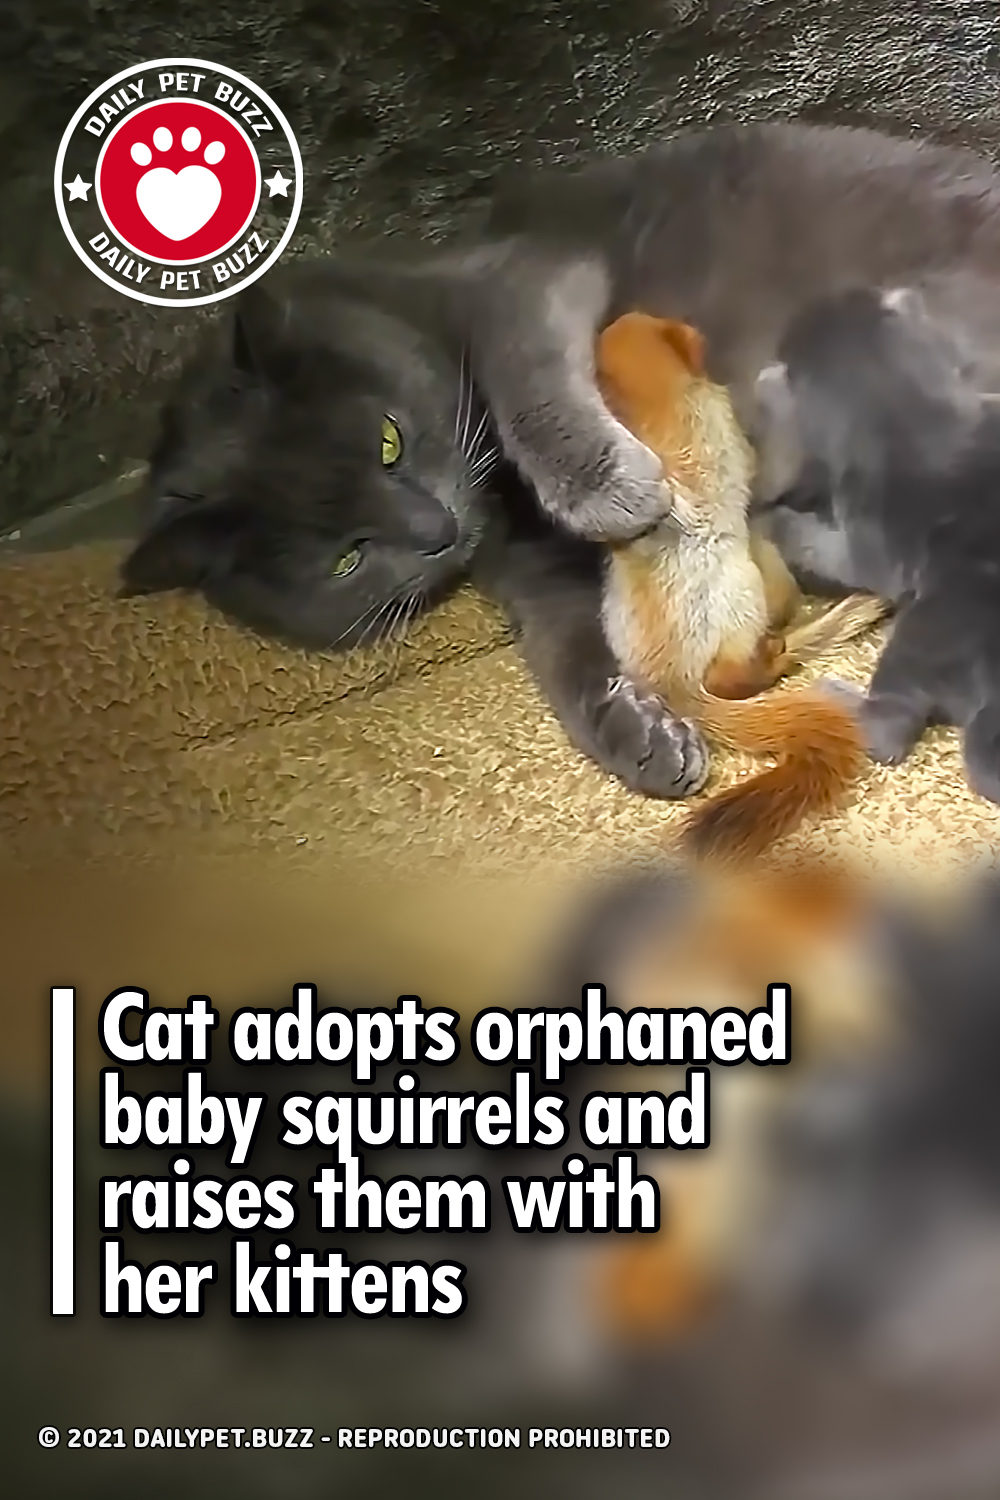 Cat adopts orphaned baby squirrels and raises them with her kittens